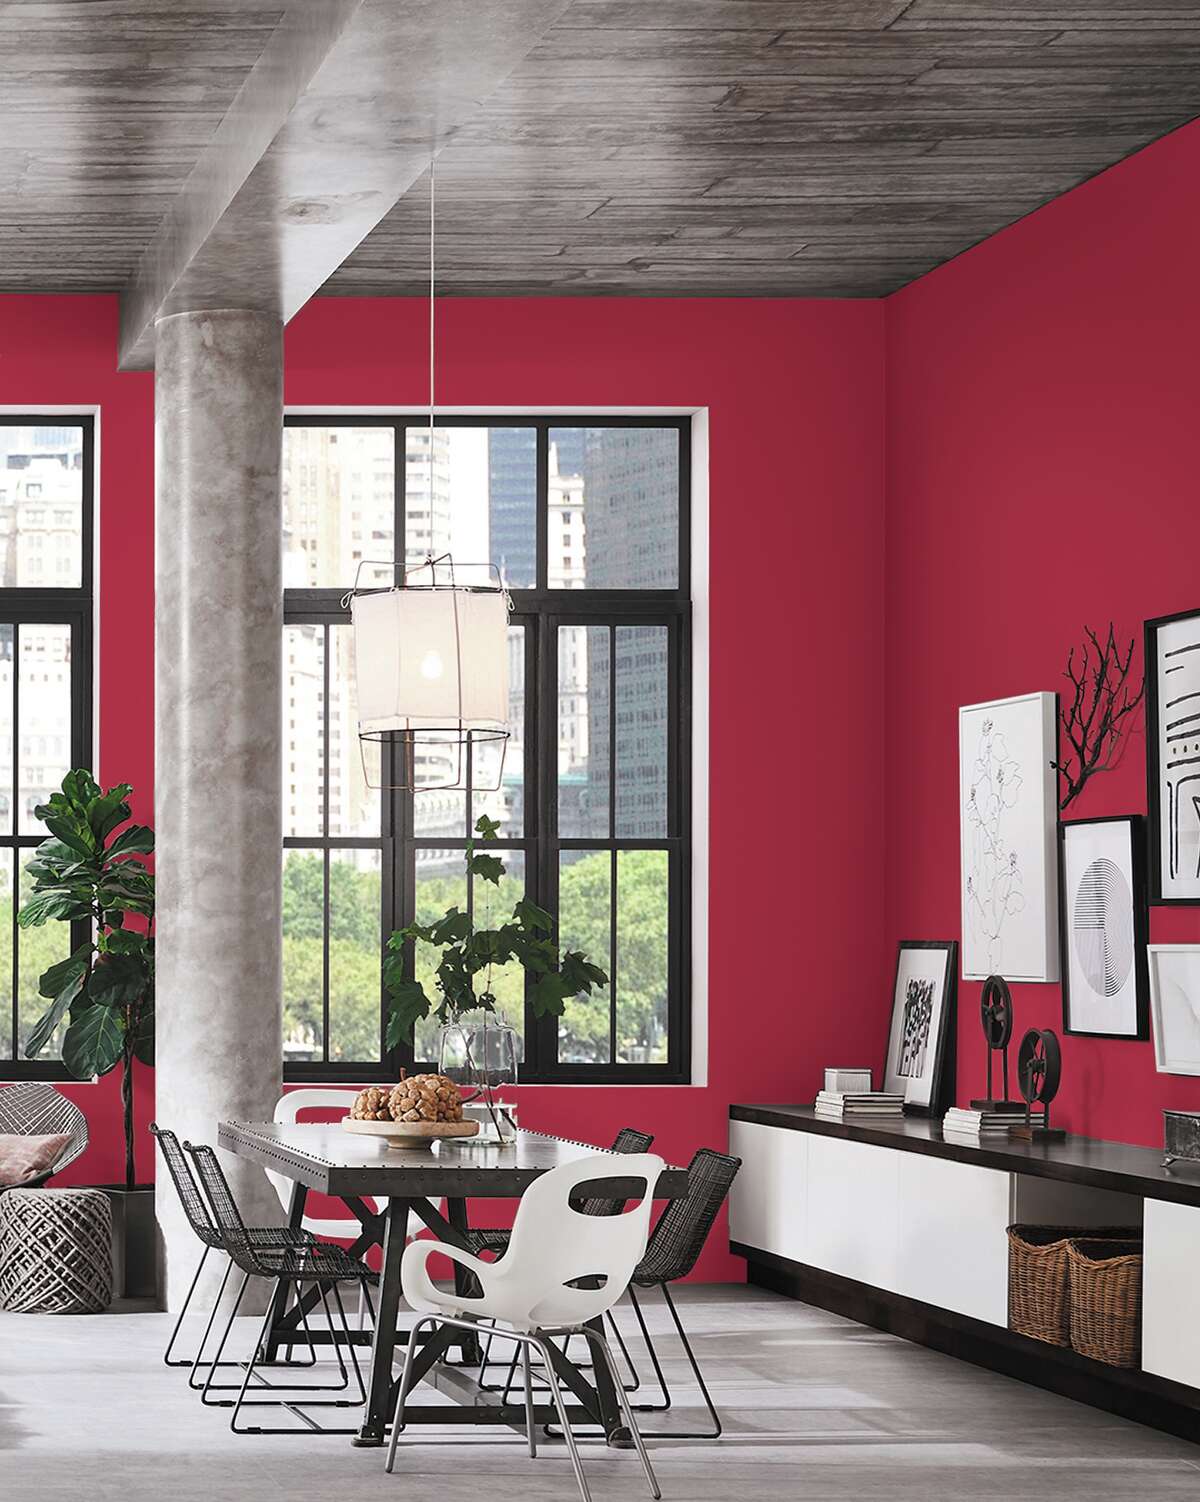 Sherwin-Williams offers up its "Radish" red paint as an option for those who love Pantone's "Viva Magenta" Color of the Year 2023 pick. This dining room is shown painted "Radish" and decorated in gray, black and white.